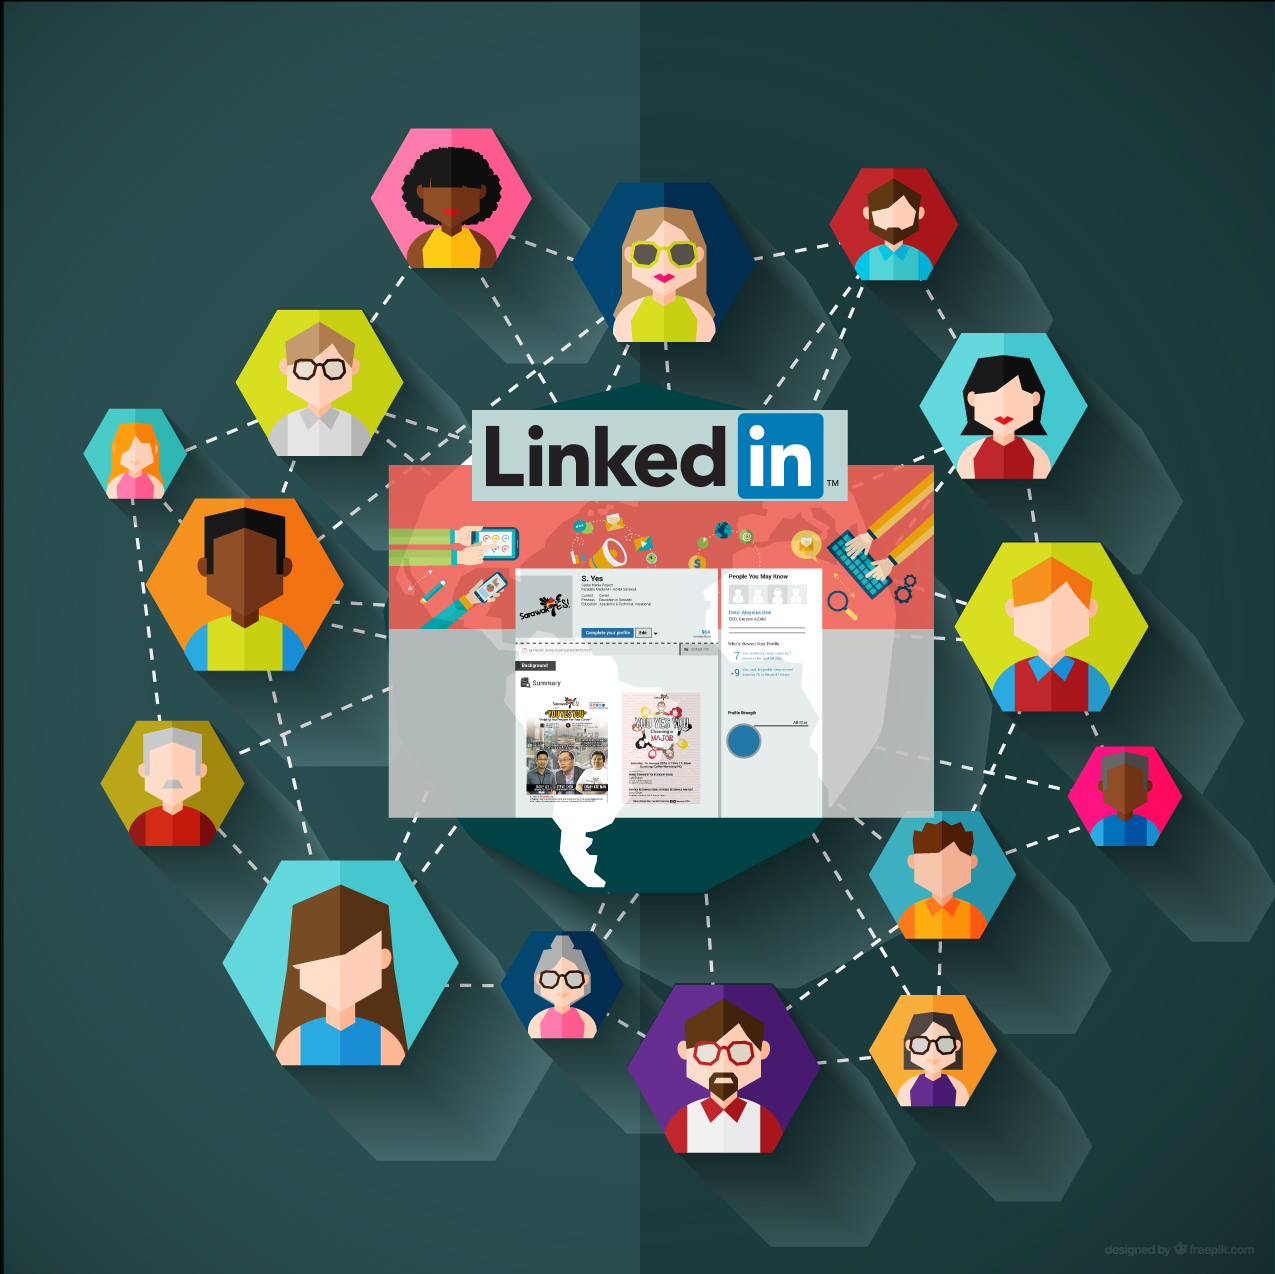 Linking into a social network online